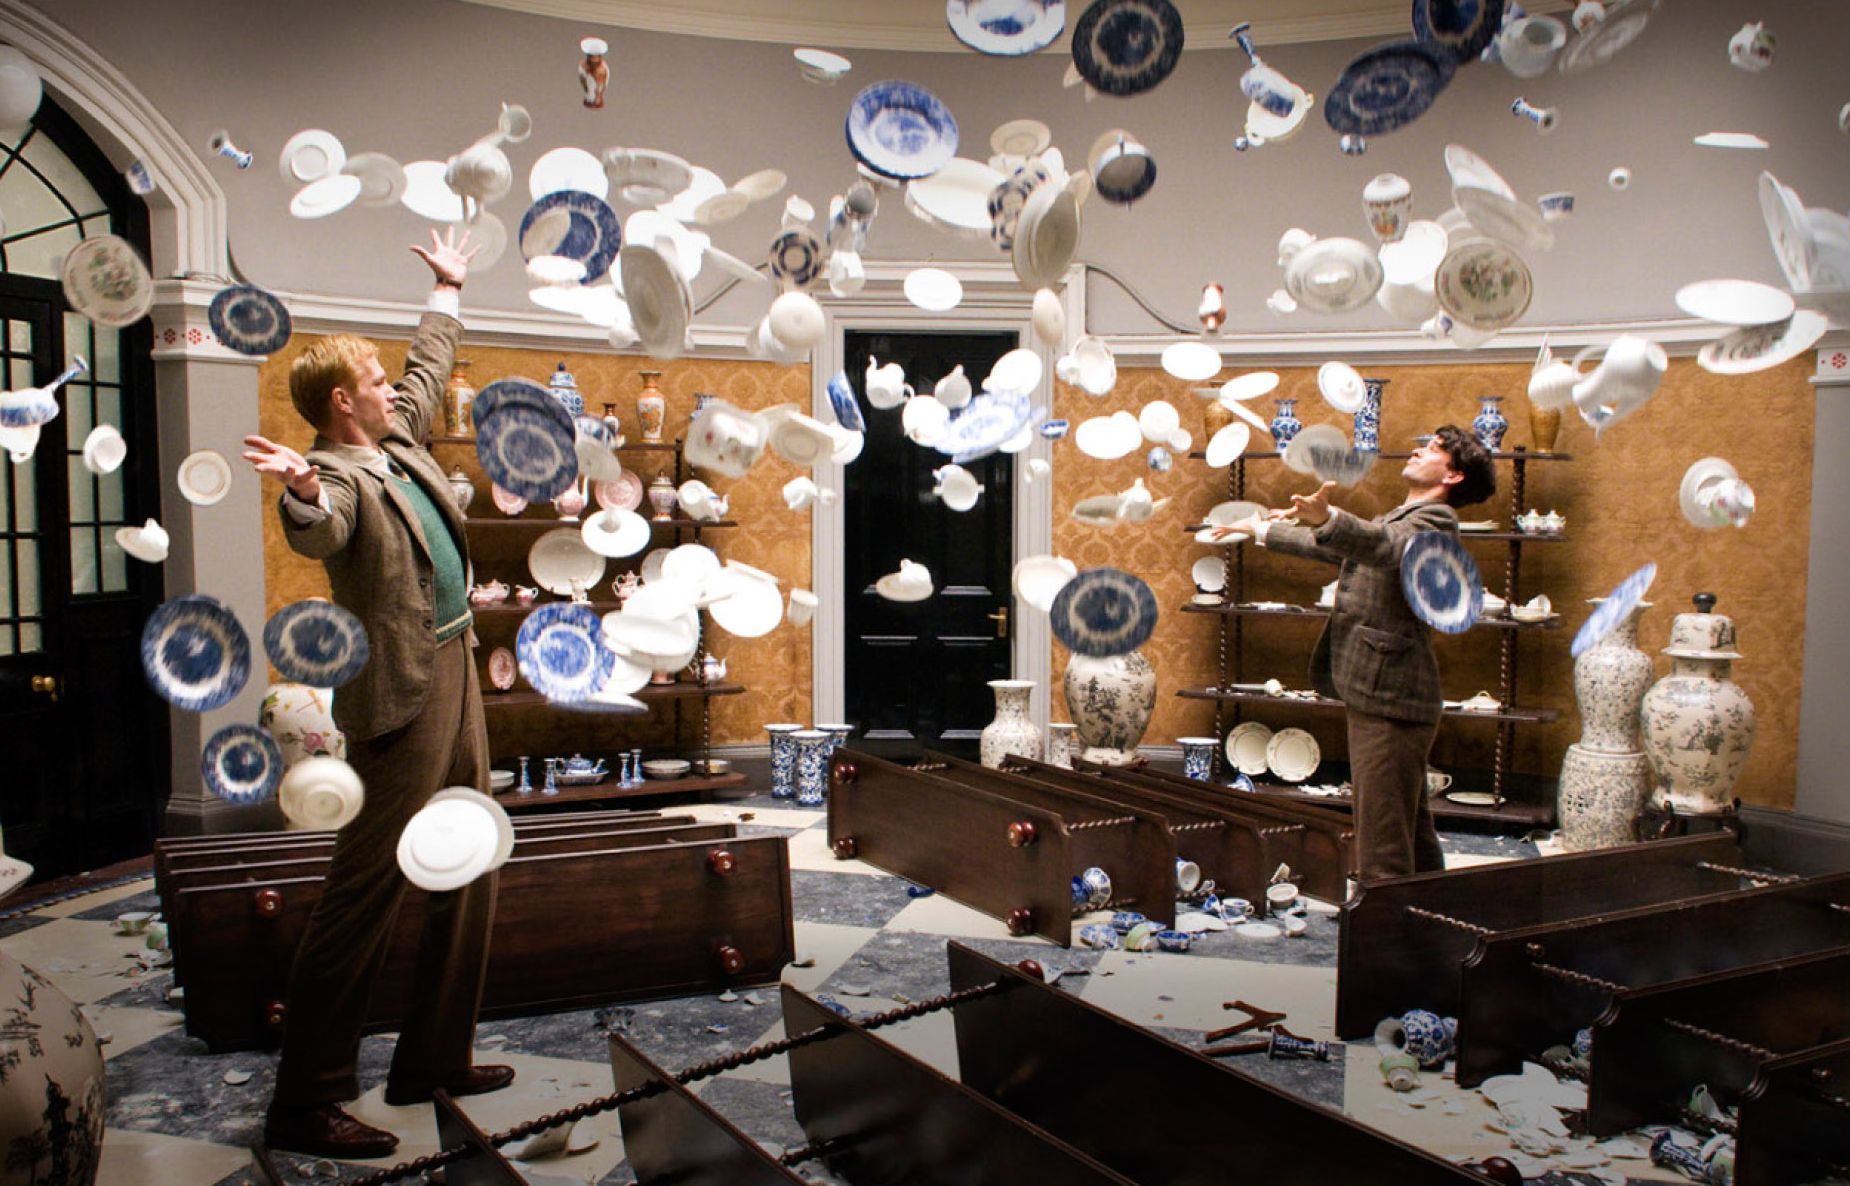 Cups and dishes fly in Cloud Atlas scene